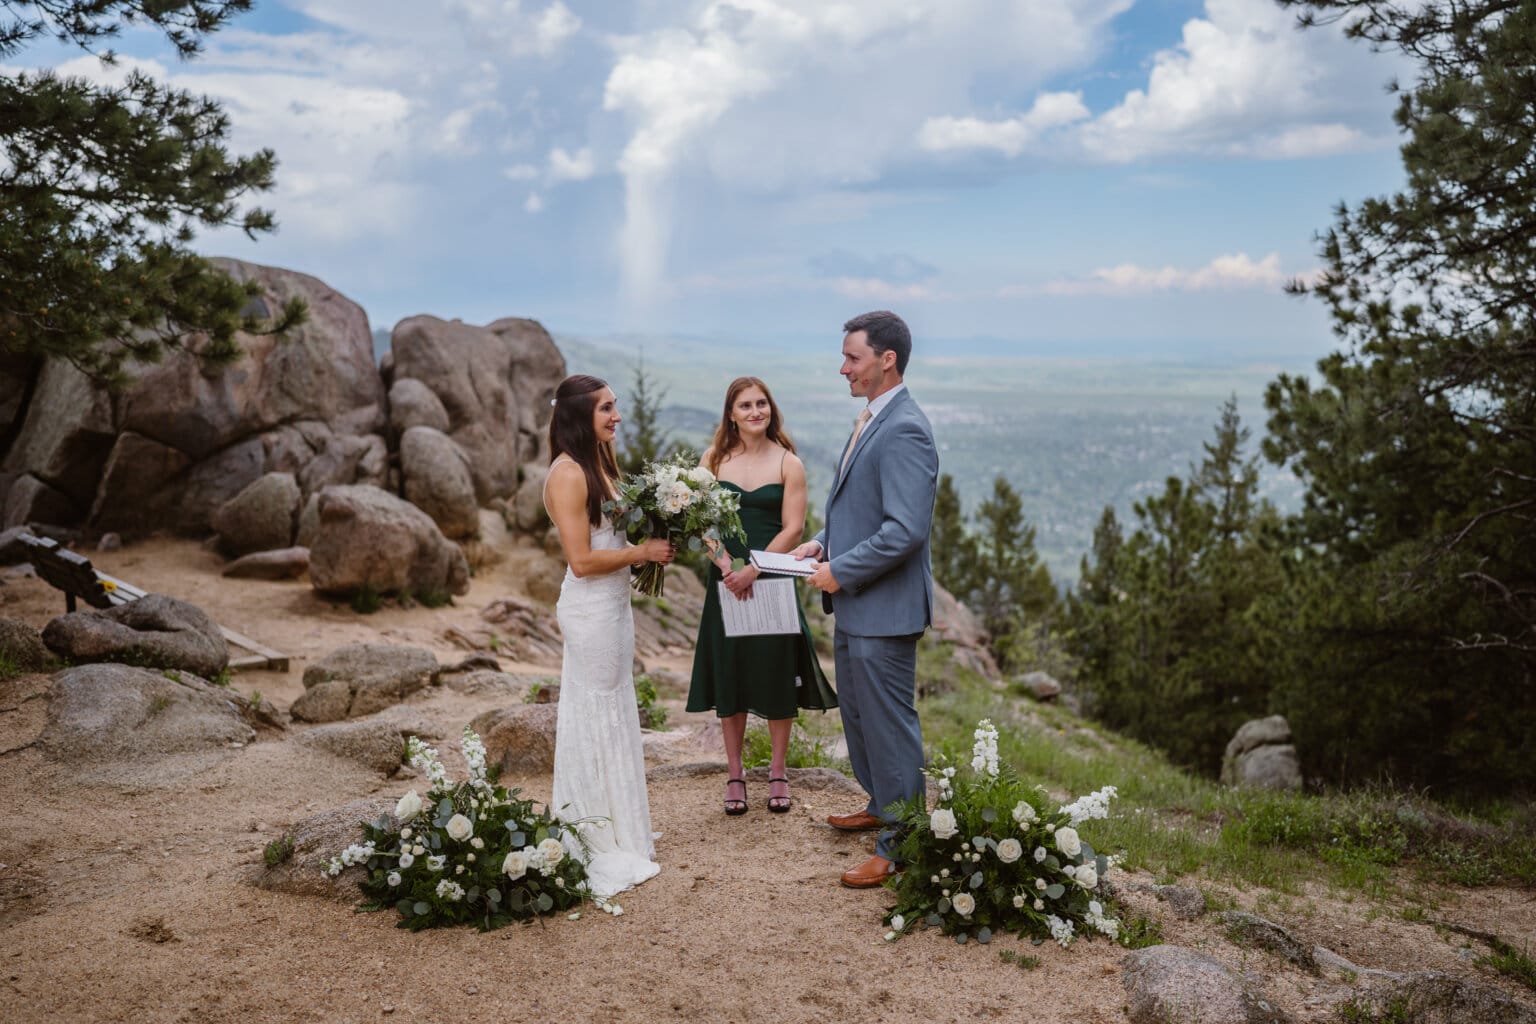 A couple getting married in Colorado with their sister officiating.